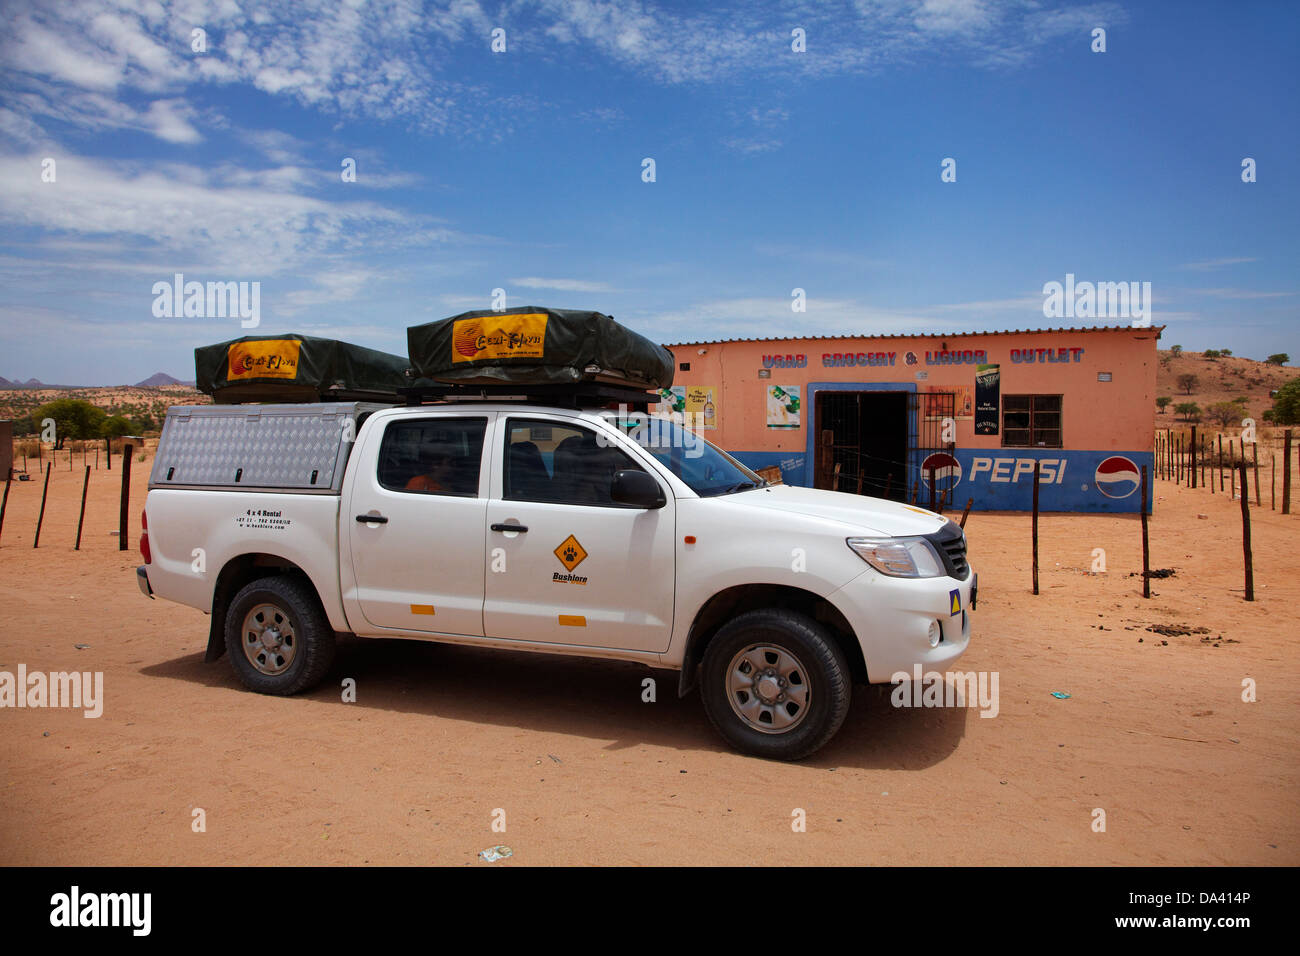 4x4 camper and Ugab Grocery and Liquor Outlet, C35 road near Ugab RIver, Erongo Region, Namibia, Africa Stock Photo